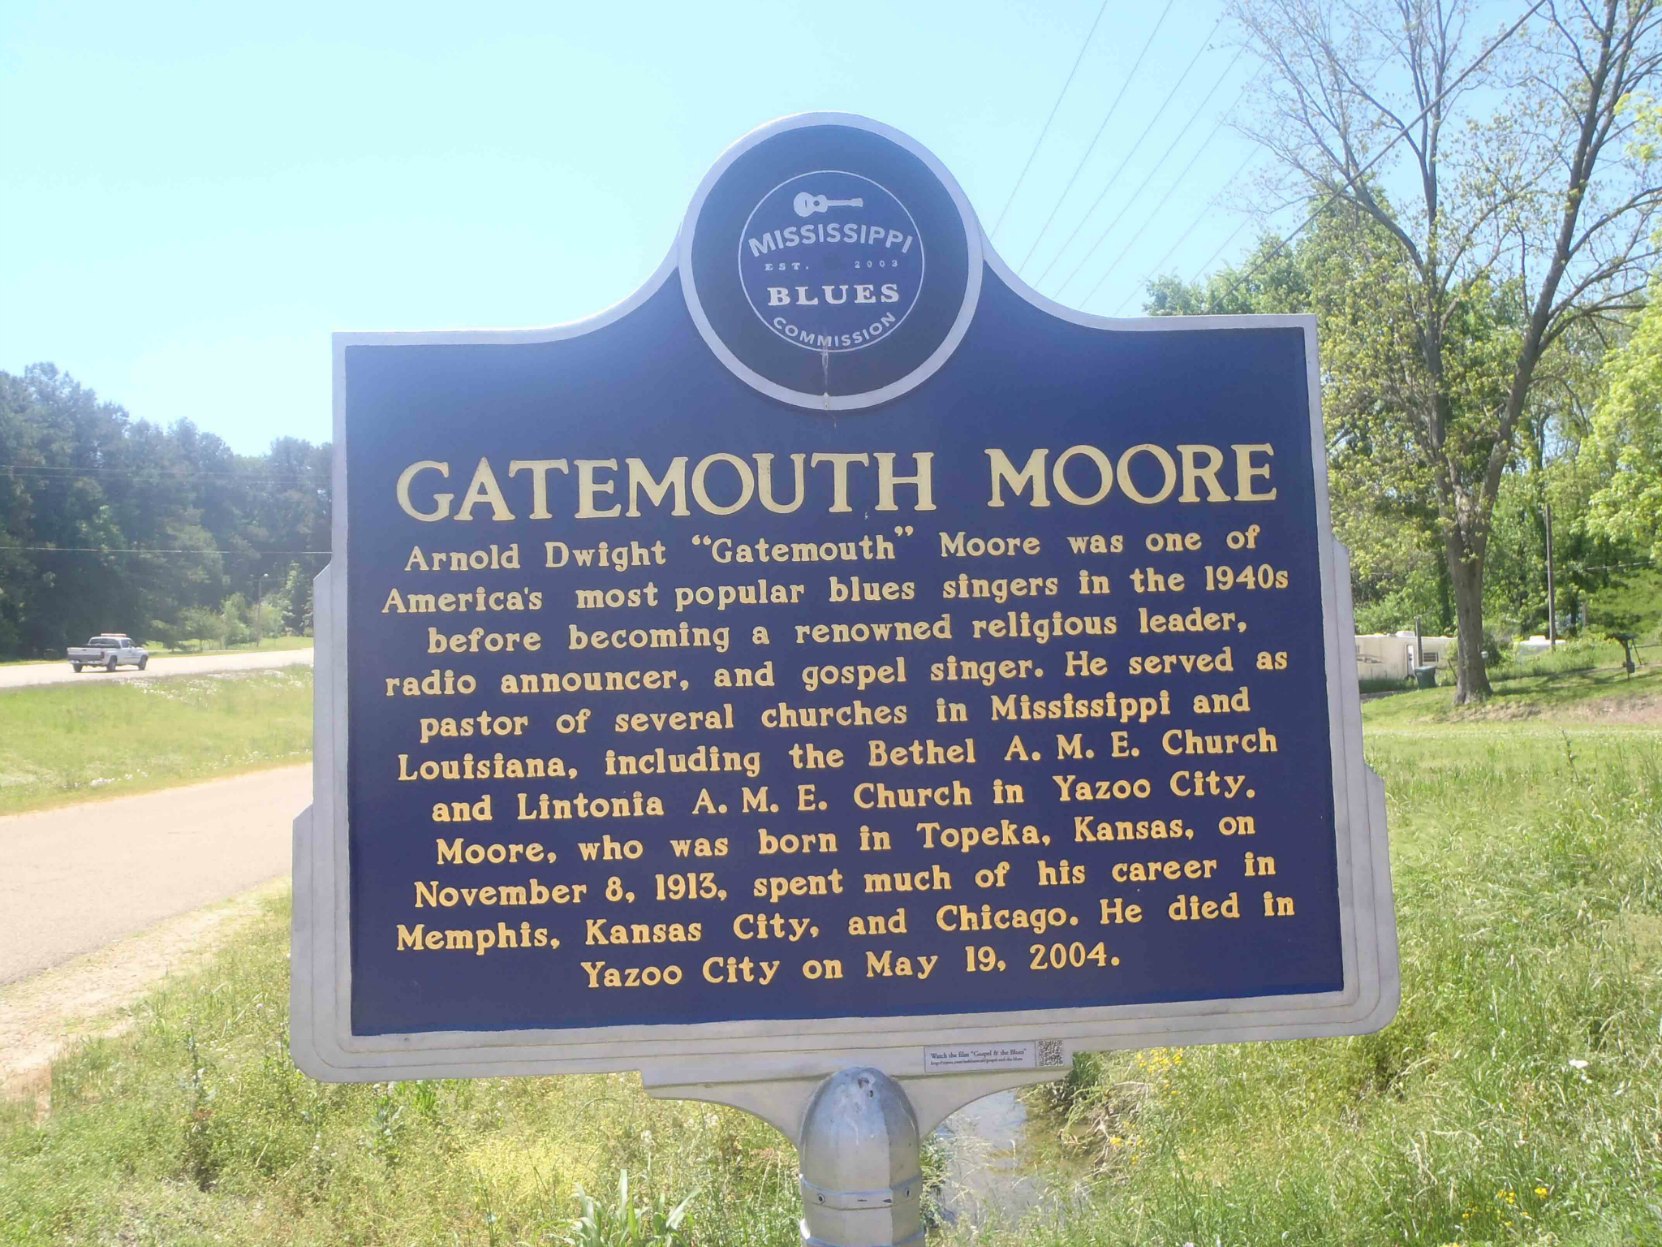 Mississippi Blues Trail marker for Gatemouth Moore, Yazoo City, Mississippi